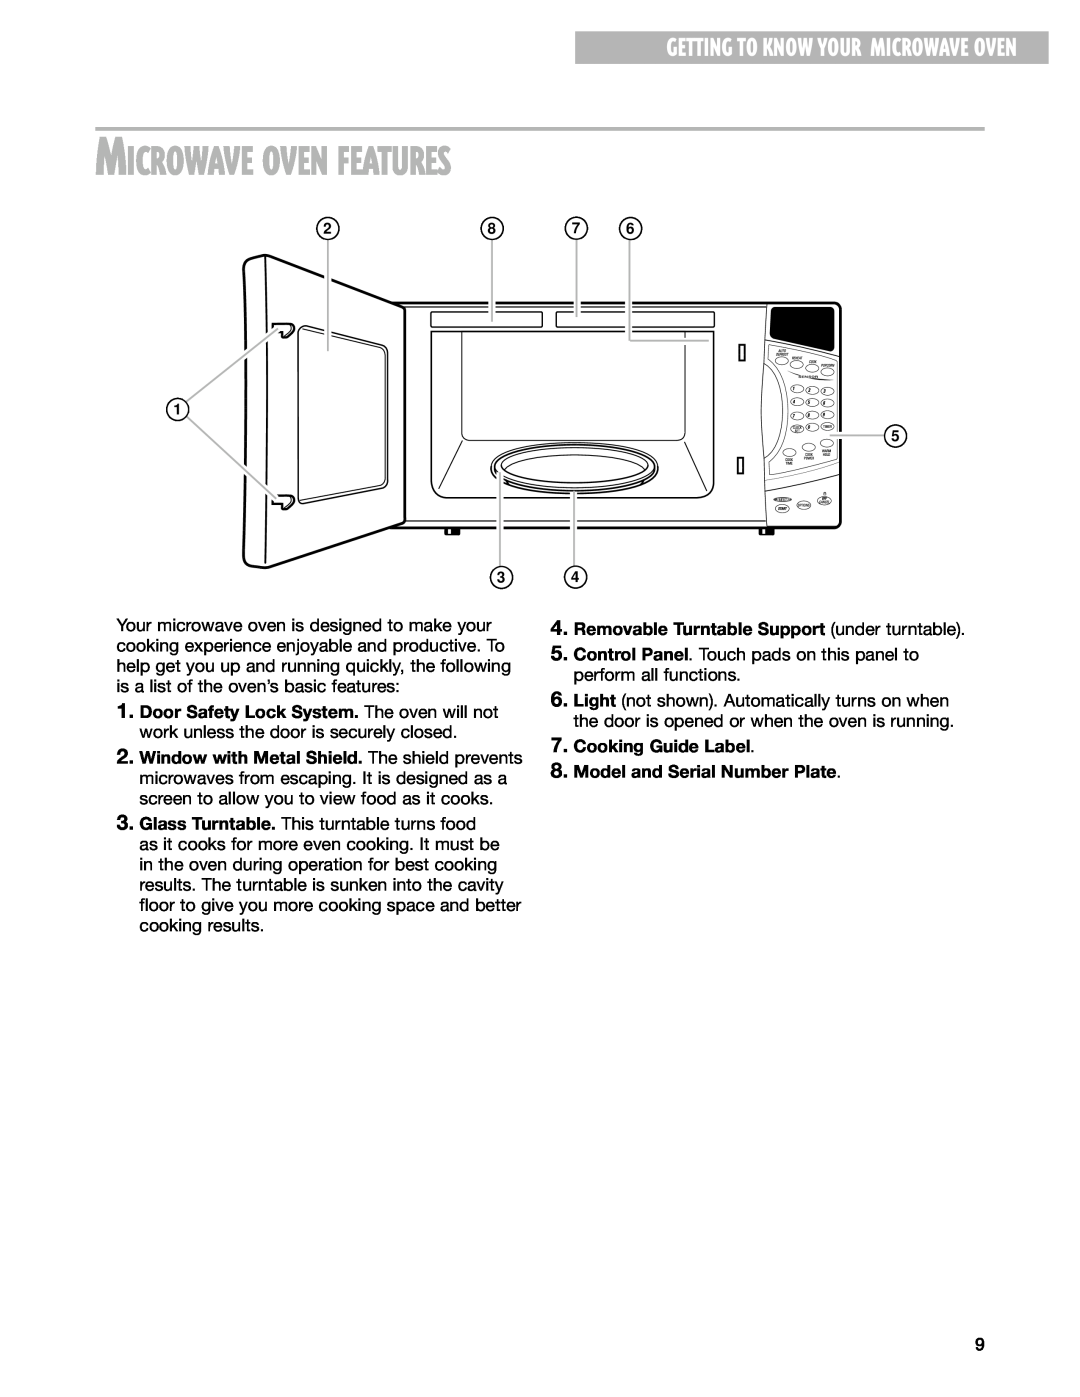 Whirlpool pmn installation instructions Microwave Oven Features, Getting To Know Your Microwave Oven 